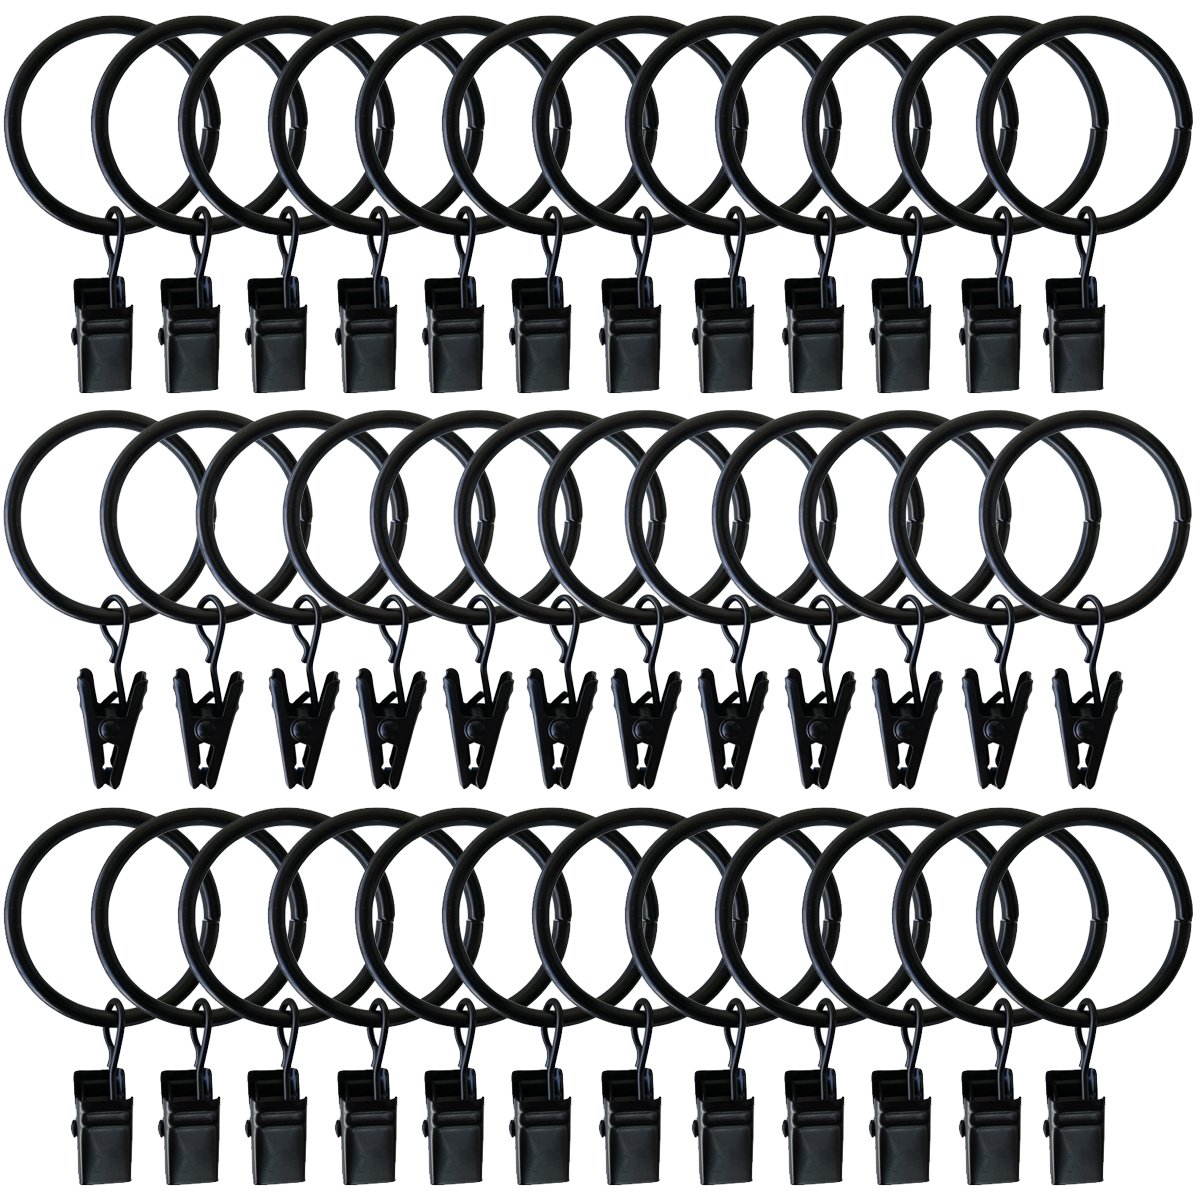 Book Cover 40 Pack Rings Curtain Clips 1.26 inch Internal Diameter Strong Metal Decorative Drapery Window Curtain Ring with Clip Rustproof Vintage Compatible with up to 1 Inch Drapery Rod Black Black 1.26'' 40 Pack